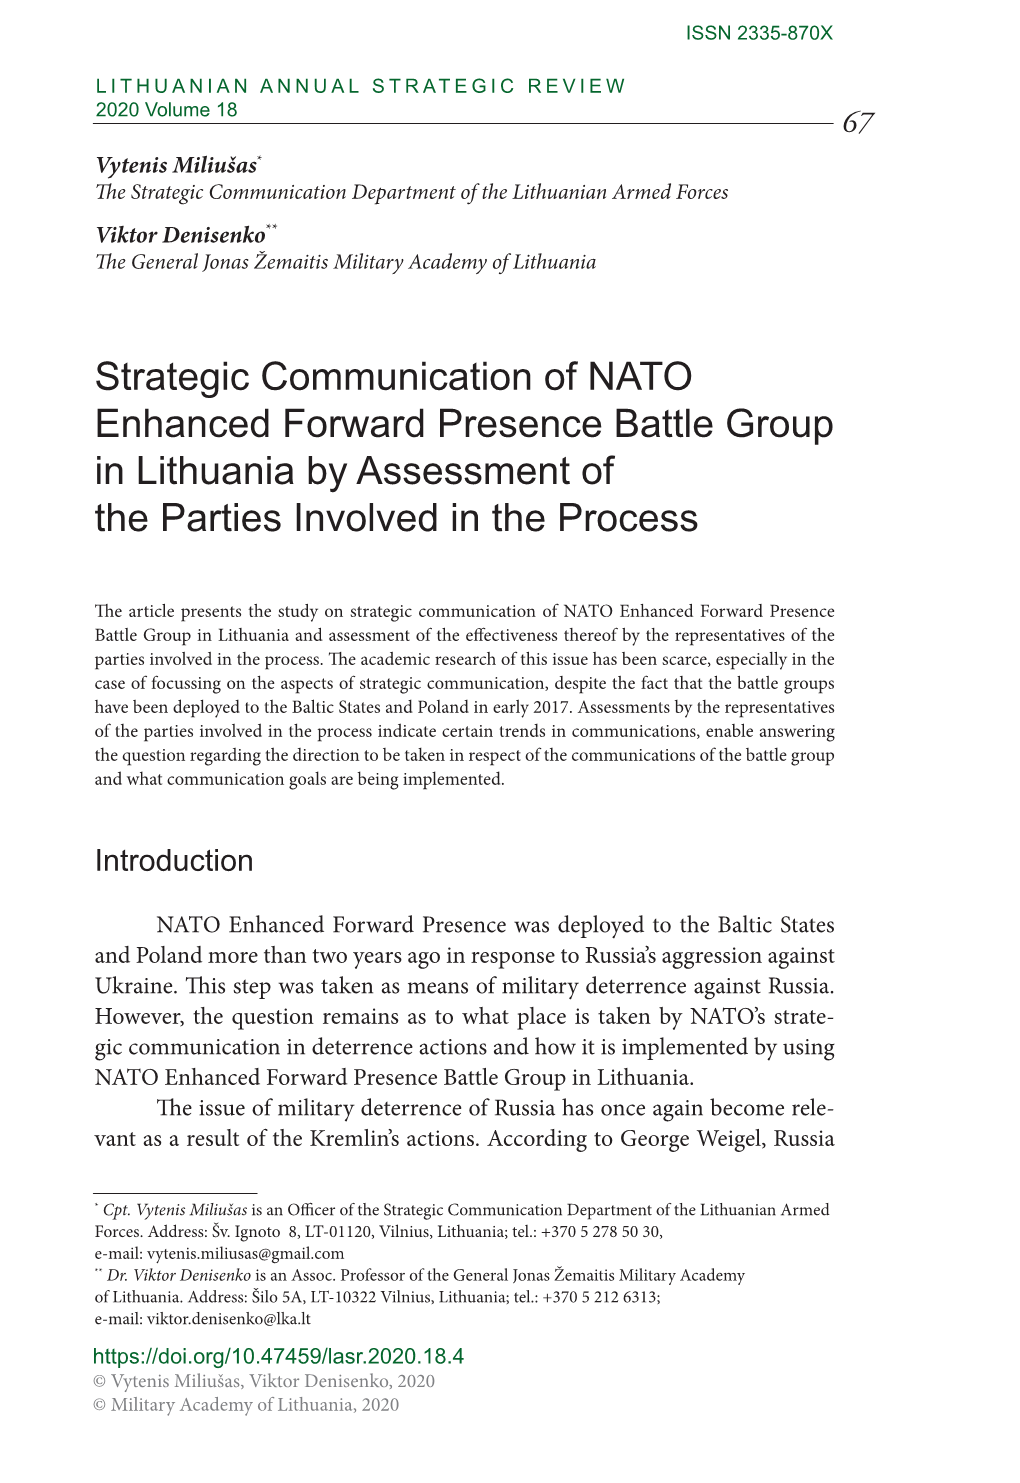 Strategic Communication of NATO Enhanced Forward Presence Battle Group in Lithuania by Assessment of the Parties Involved in the Process